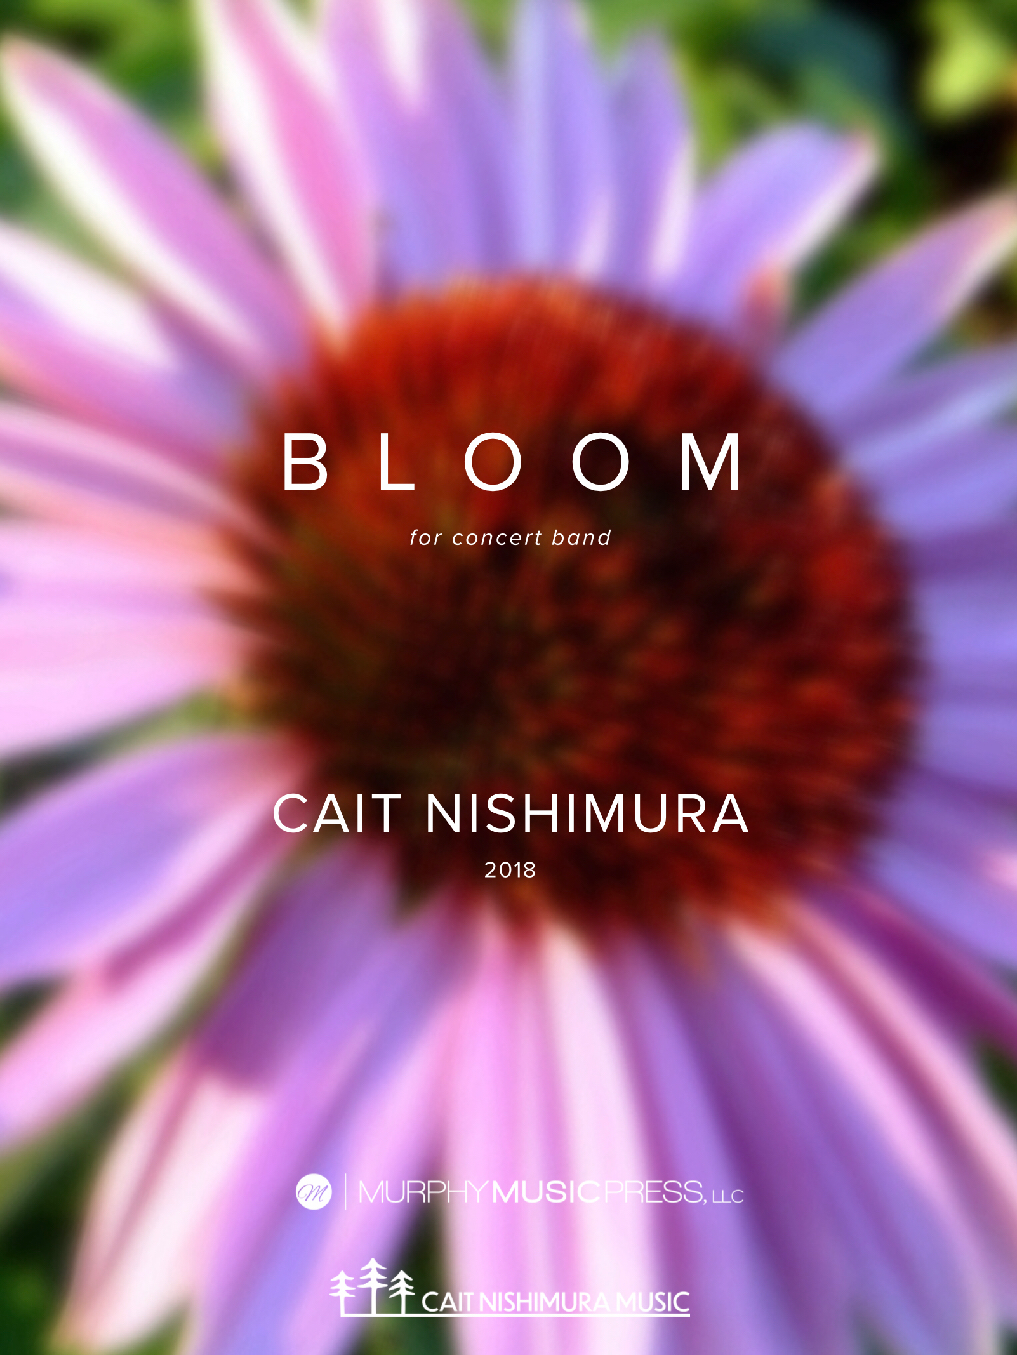 Bloom by Cait Nishimura